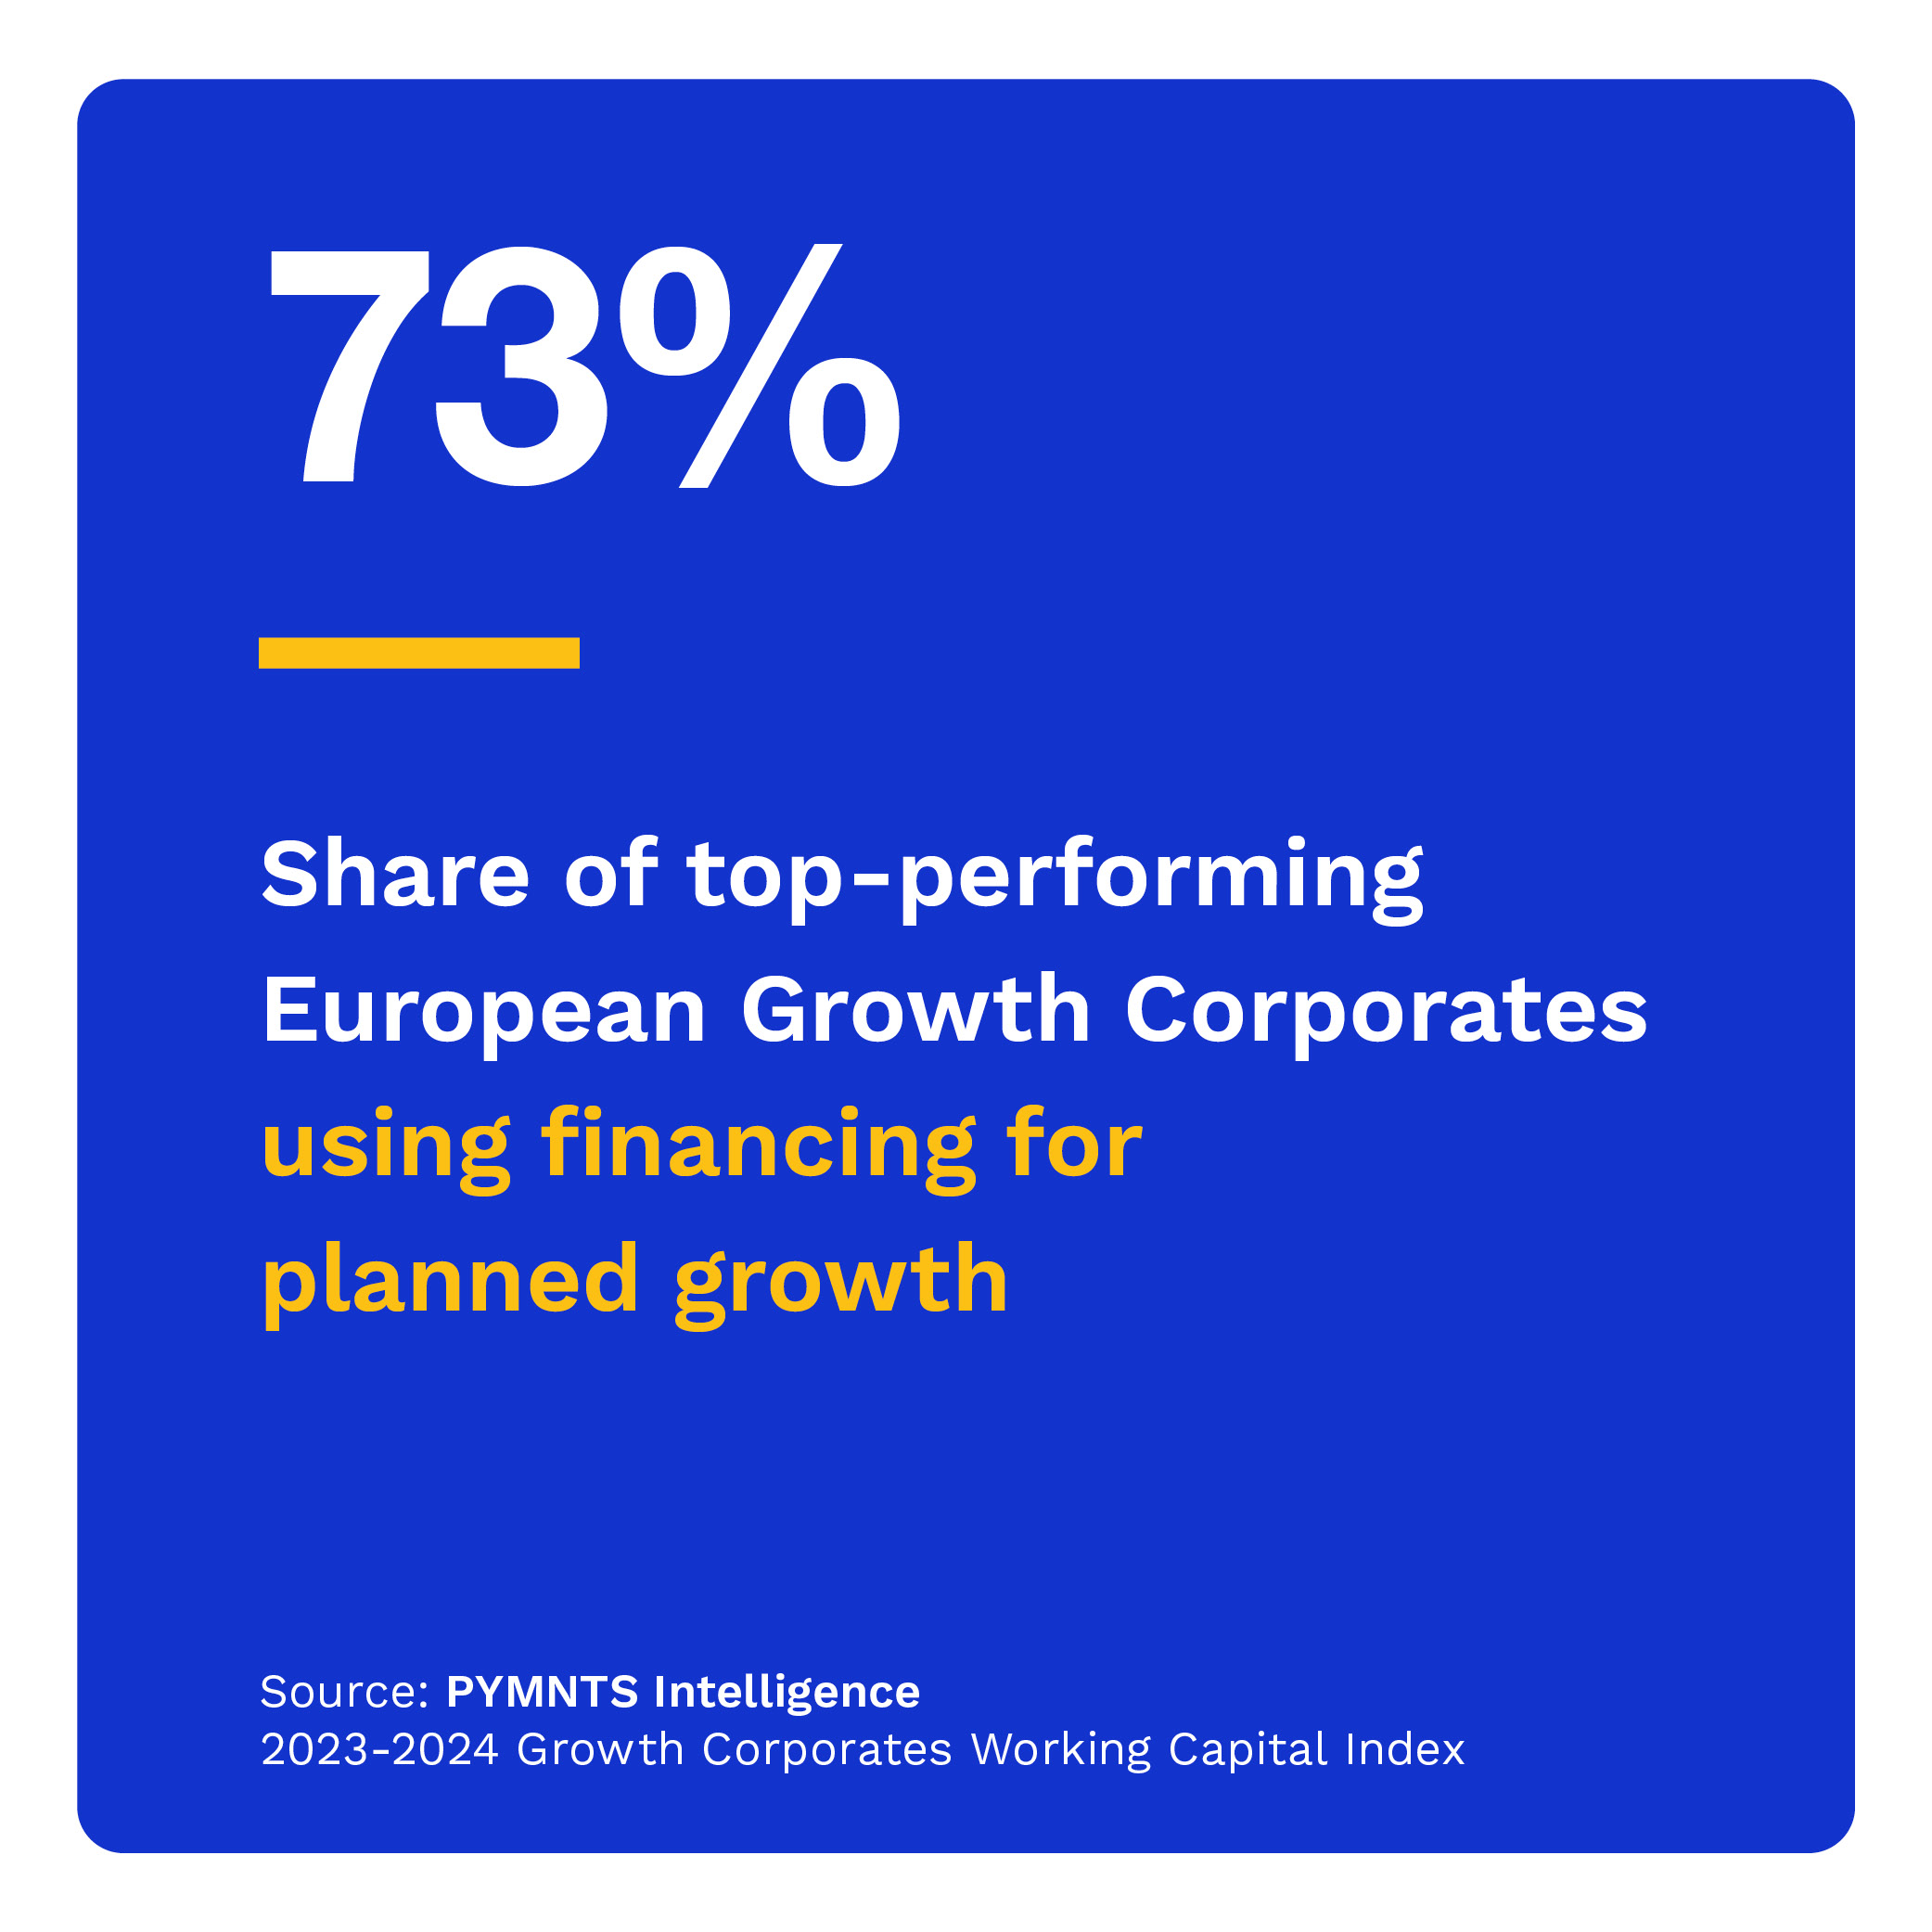  Share of top-performing European Growth Corporates using financing for planned growth